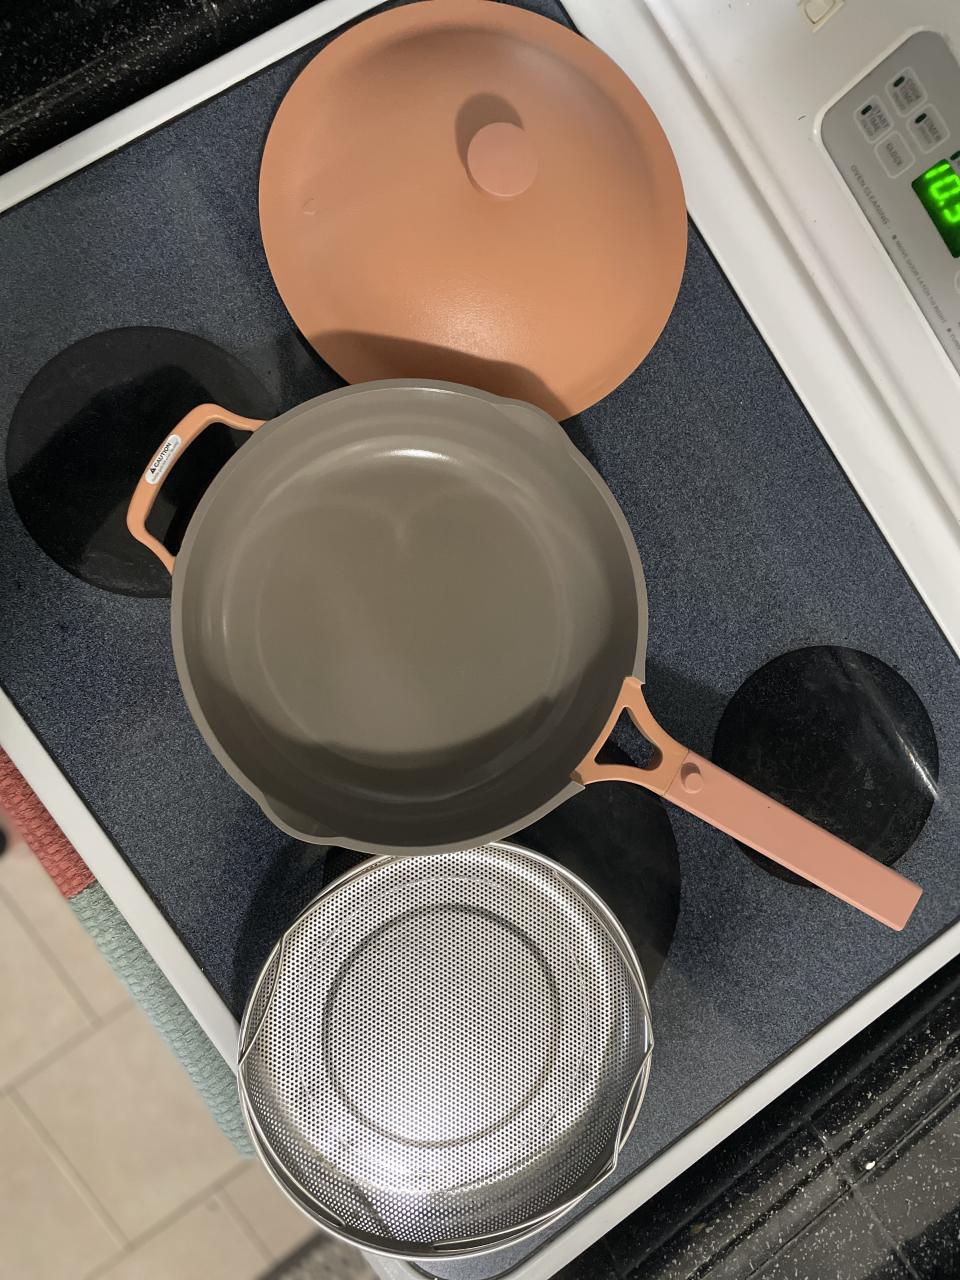 The different elements of the Always Pan